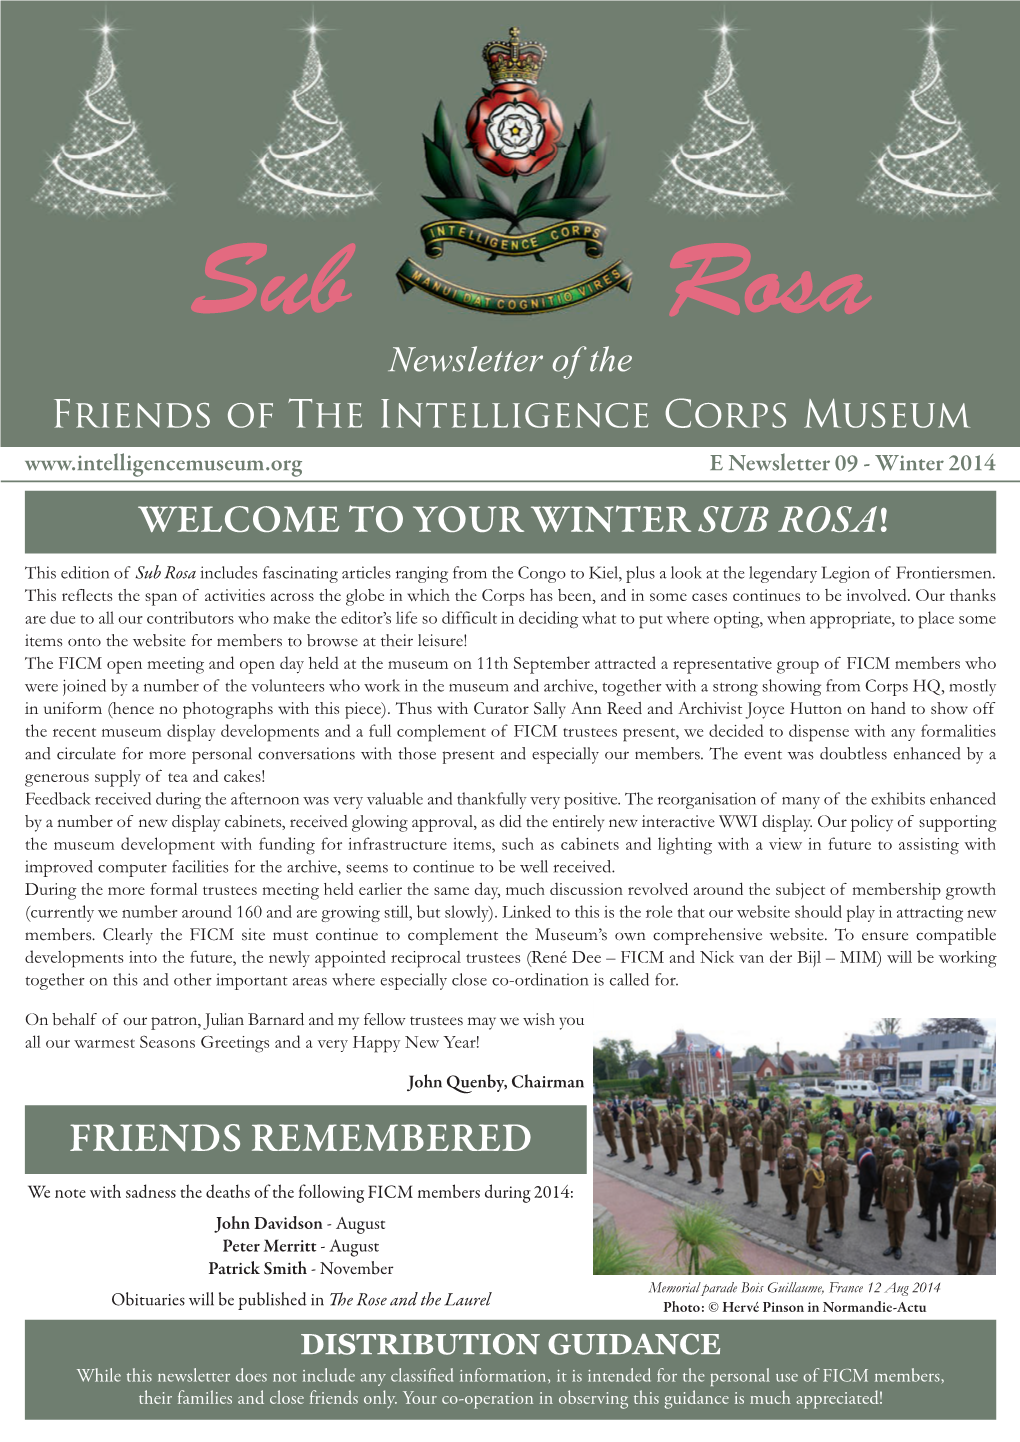 Sub Rosa Newsletter of the Friends of the Intelligence Corps Museum E Newsletter 09 - Winter 2014 WELCOME to YOUR WINTER SUB ROSA!